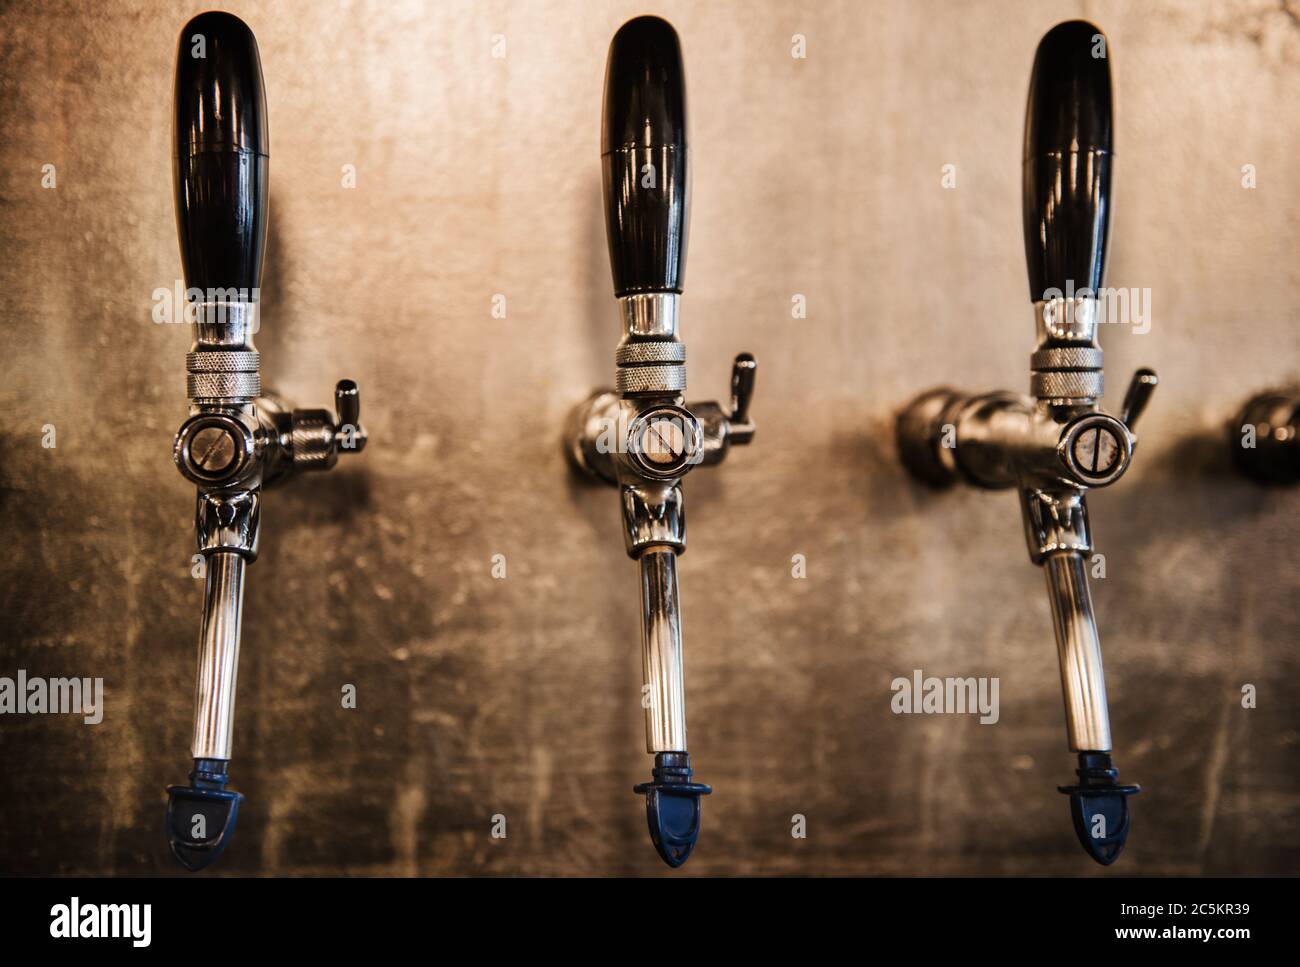 Beer/beverage tap in a bar Stock Photo